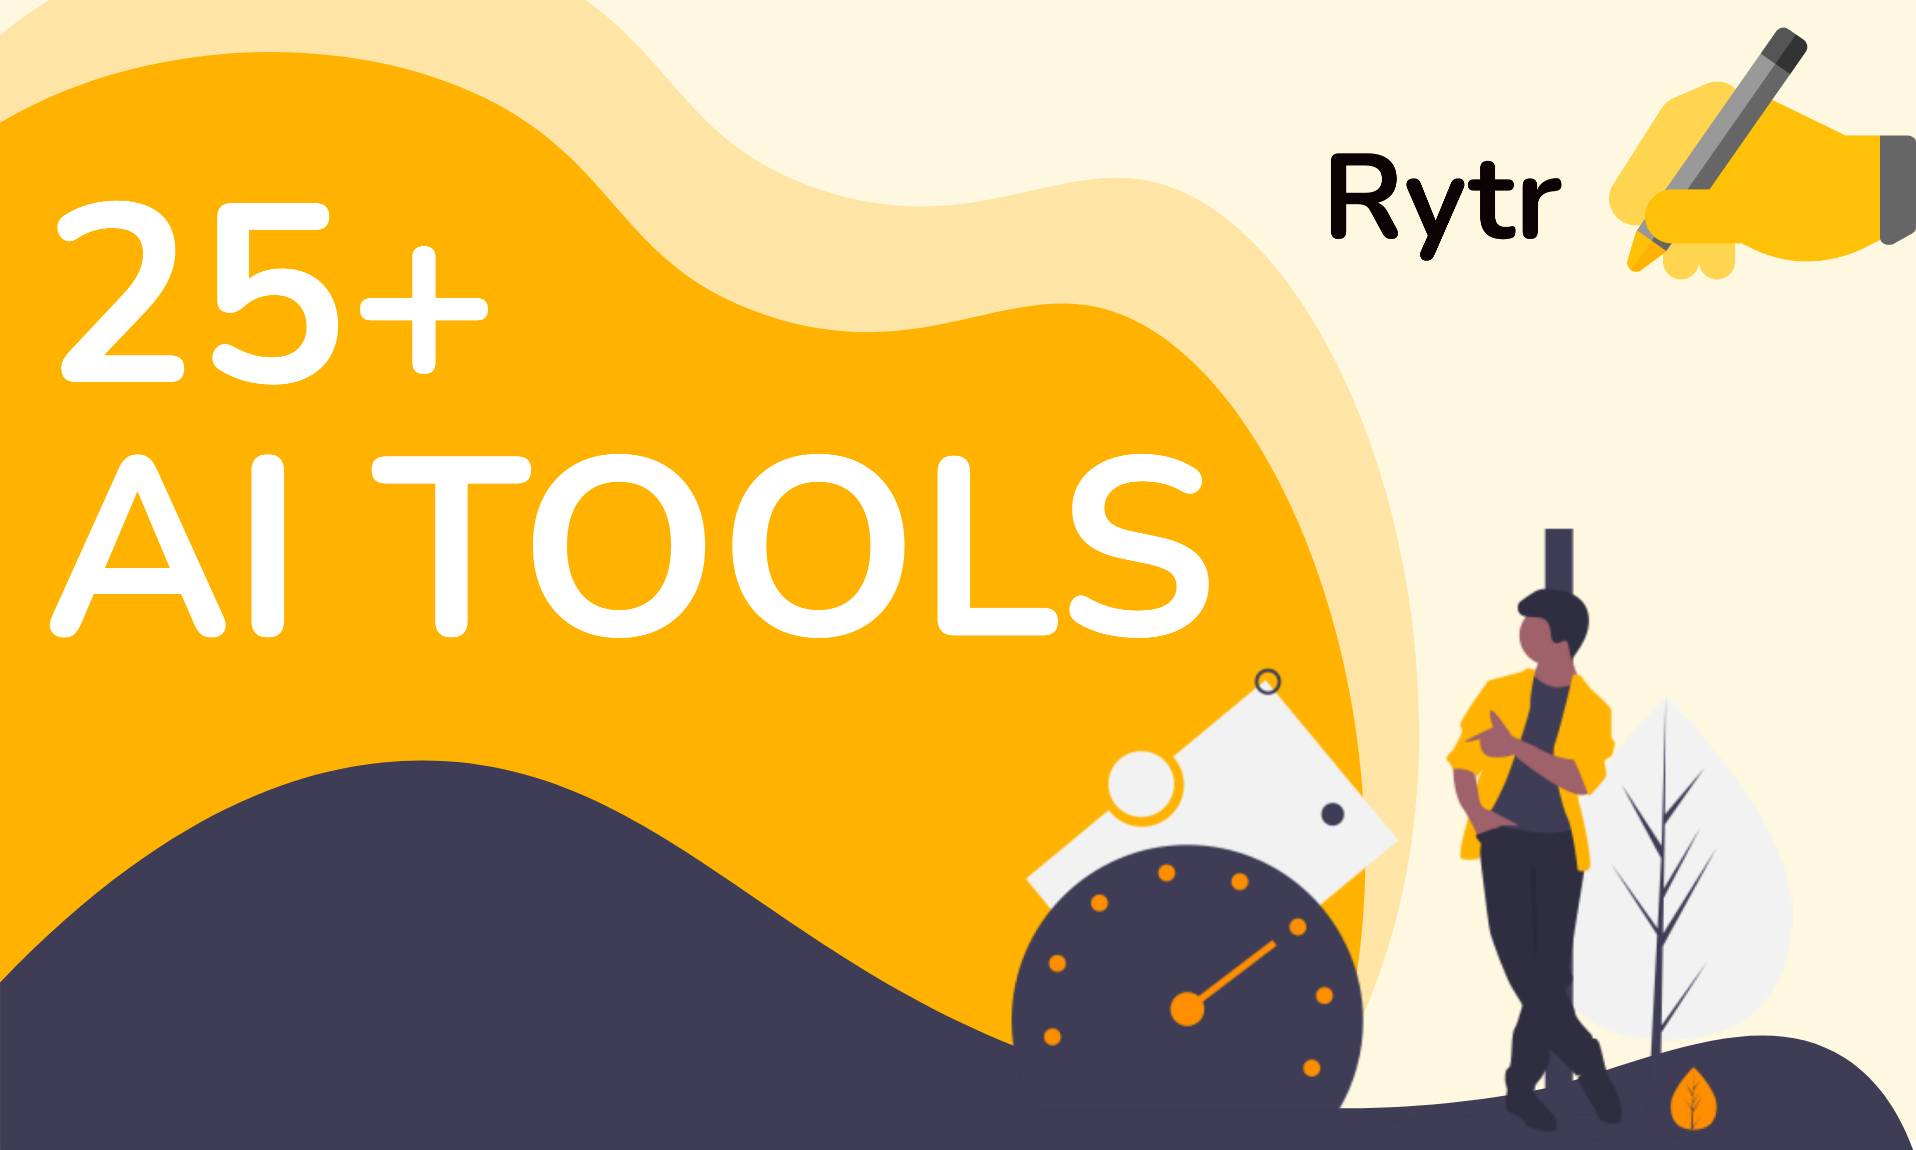 Rytr - An AI tool who proclaims to be the best with 25 tools